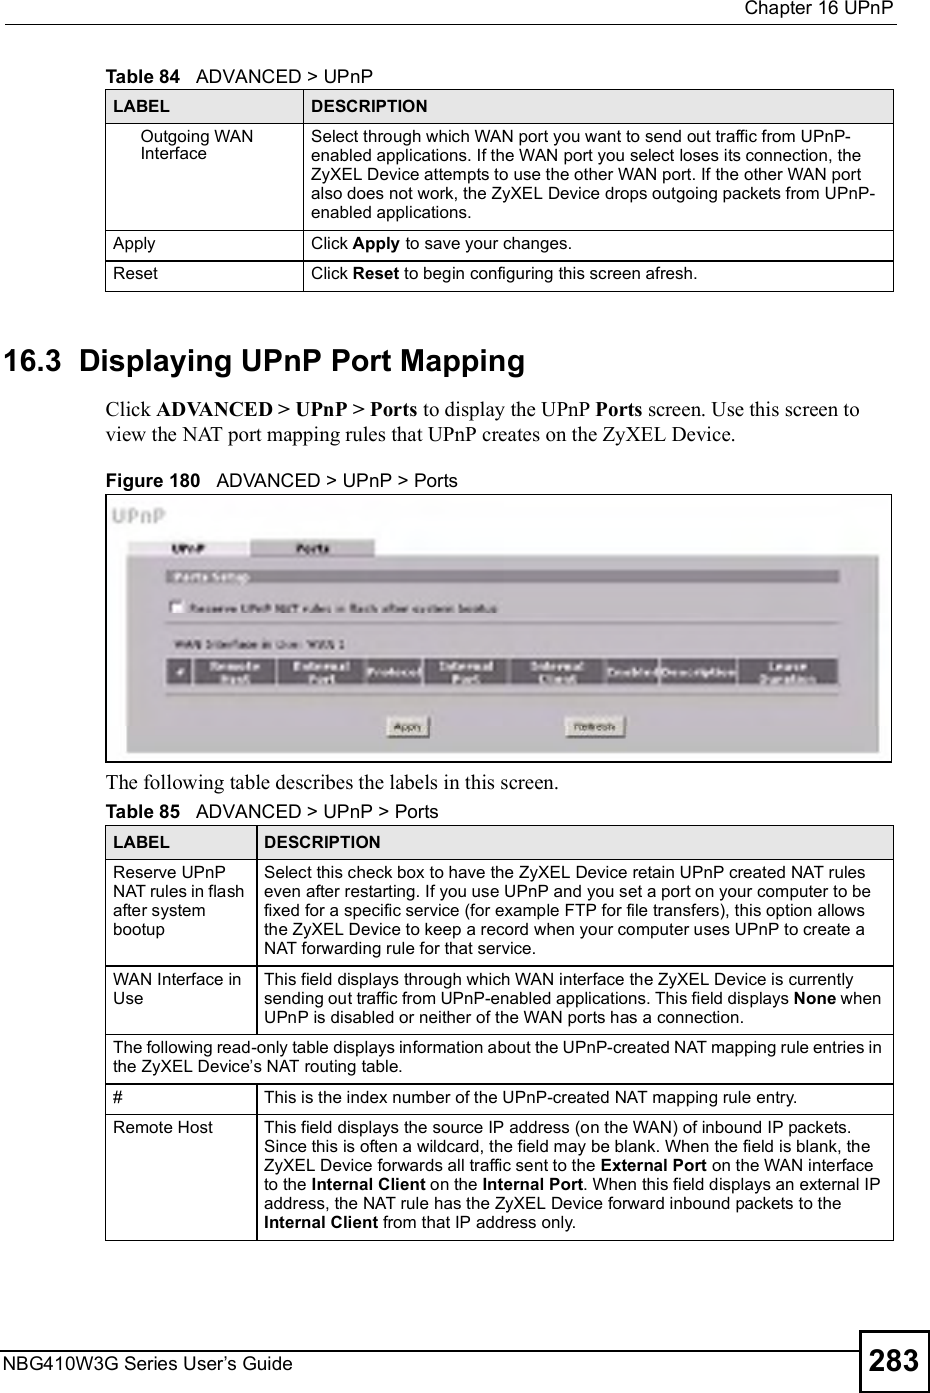  Chapter 16UPnPNBG410W3G Series User s Guide 28316.3  Displaying UPnP Port Mapping   Click ADVANCED &gt; UPnP &gt; Ports to display the UPnP Ports screen. Use this screen to view the NAT port mapping rules that UPnP creates on the ZyXEL Device. Figure 180   ADVANCED &gt; UPnP &gt; PortsThe following table describes the labels in this screen.  Outgoing WAN InterfaceSelect through which WAN port you want to send out traffic from UPnP-enabled applications. If the WAN port you select loses its connection, the ZyXEL Device attempts to use the other WAN port. If the other WAN port also does not work, the ZyXEL Device drops outgoing packets from UPnP-enabled applications.Apply Click Apply to save your changes.Reset Click Reset to begin configuring this screen afresh.Table 84   ADVANCED &gt; UPnPLABEL DESCRIPTIONTable 85   ADVANCED &gt; UPnP &gt; PortsLABEL DESCRIPTIONReserve UPnP NAT rules in flash after system bootupSelect this check box to have the ZyXEL Device retain UPnP created NAT rules even after restarting. If you use UPnP and you set a port on your computer to be fixed for a specific service (for example FTP for file transfers), this option allows the ZyXEL Device to keep a record when your computer uses UPnP to create a NAT forwarding rule for that service. WAN Interface in UseThis field displays through which WAN interface the ZyXEL Device is currently sending out traffic from UPnP-enabled applications. This field displays None when UPnP is disabled or neither of the WAN ports has a connection.The following read-only table displays information about the UPnP-created NAT mapping rule entries in the ZyXEL Device s NAT routing table.#This is the index number of the UPnP-created NAT mapping rule entry.Remote Host This field displays the source IP address (on the WAN) of inbound IP packets. Since this is often a wildcard, the field may be blank. When the field is blank, the ZyXEL Device forwards all traffic sent to the External Port on the WAN interface to the Internal Client on the Internal Port. When this field displays an external IP address, the NAT rule has the ZyXEL Device forward inbound packets to the Internal Client from that IP address only. 